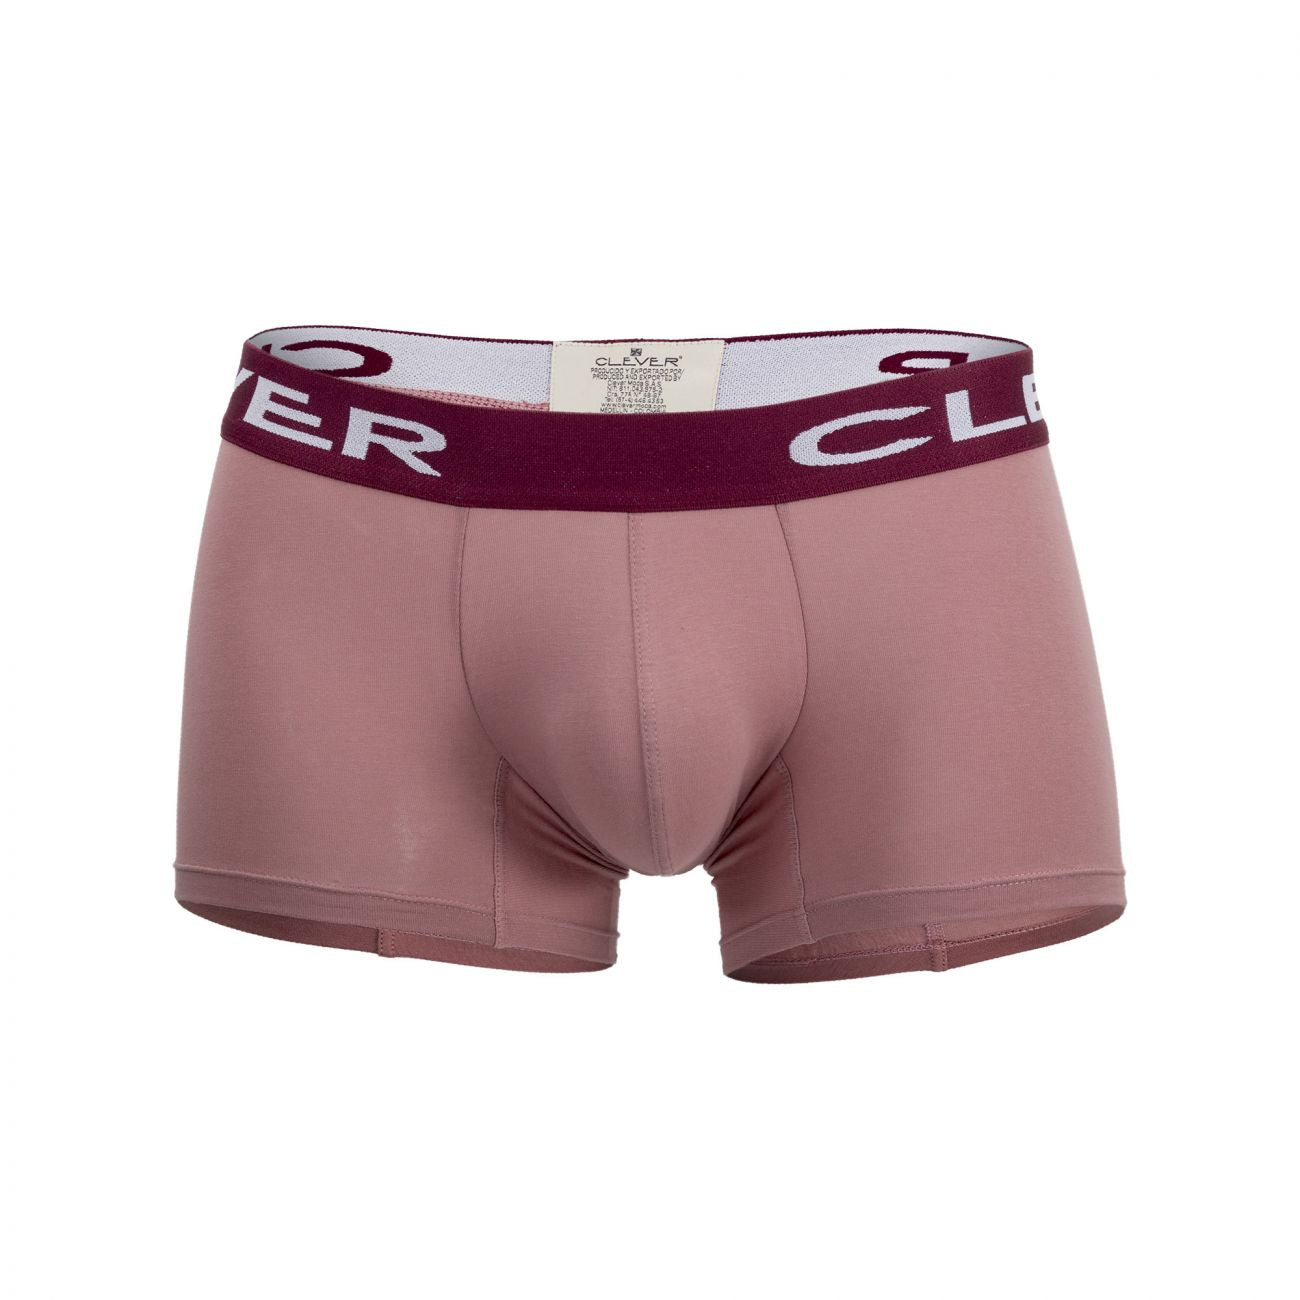 Clever 2199 Limited Edition Boxer Briefs Trunks Coral